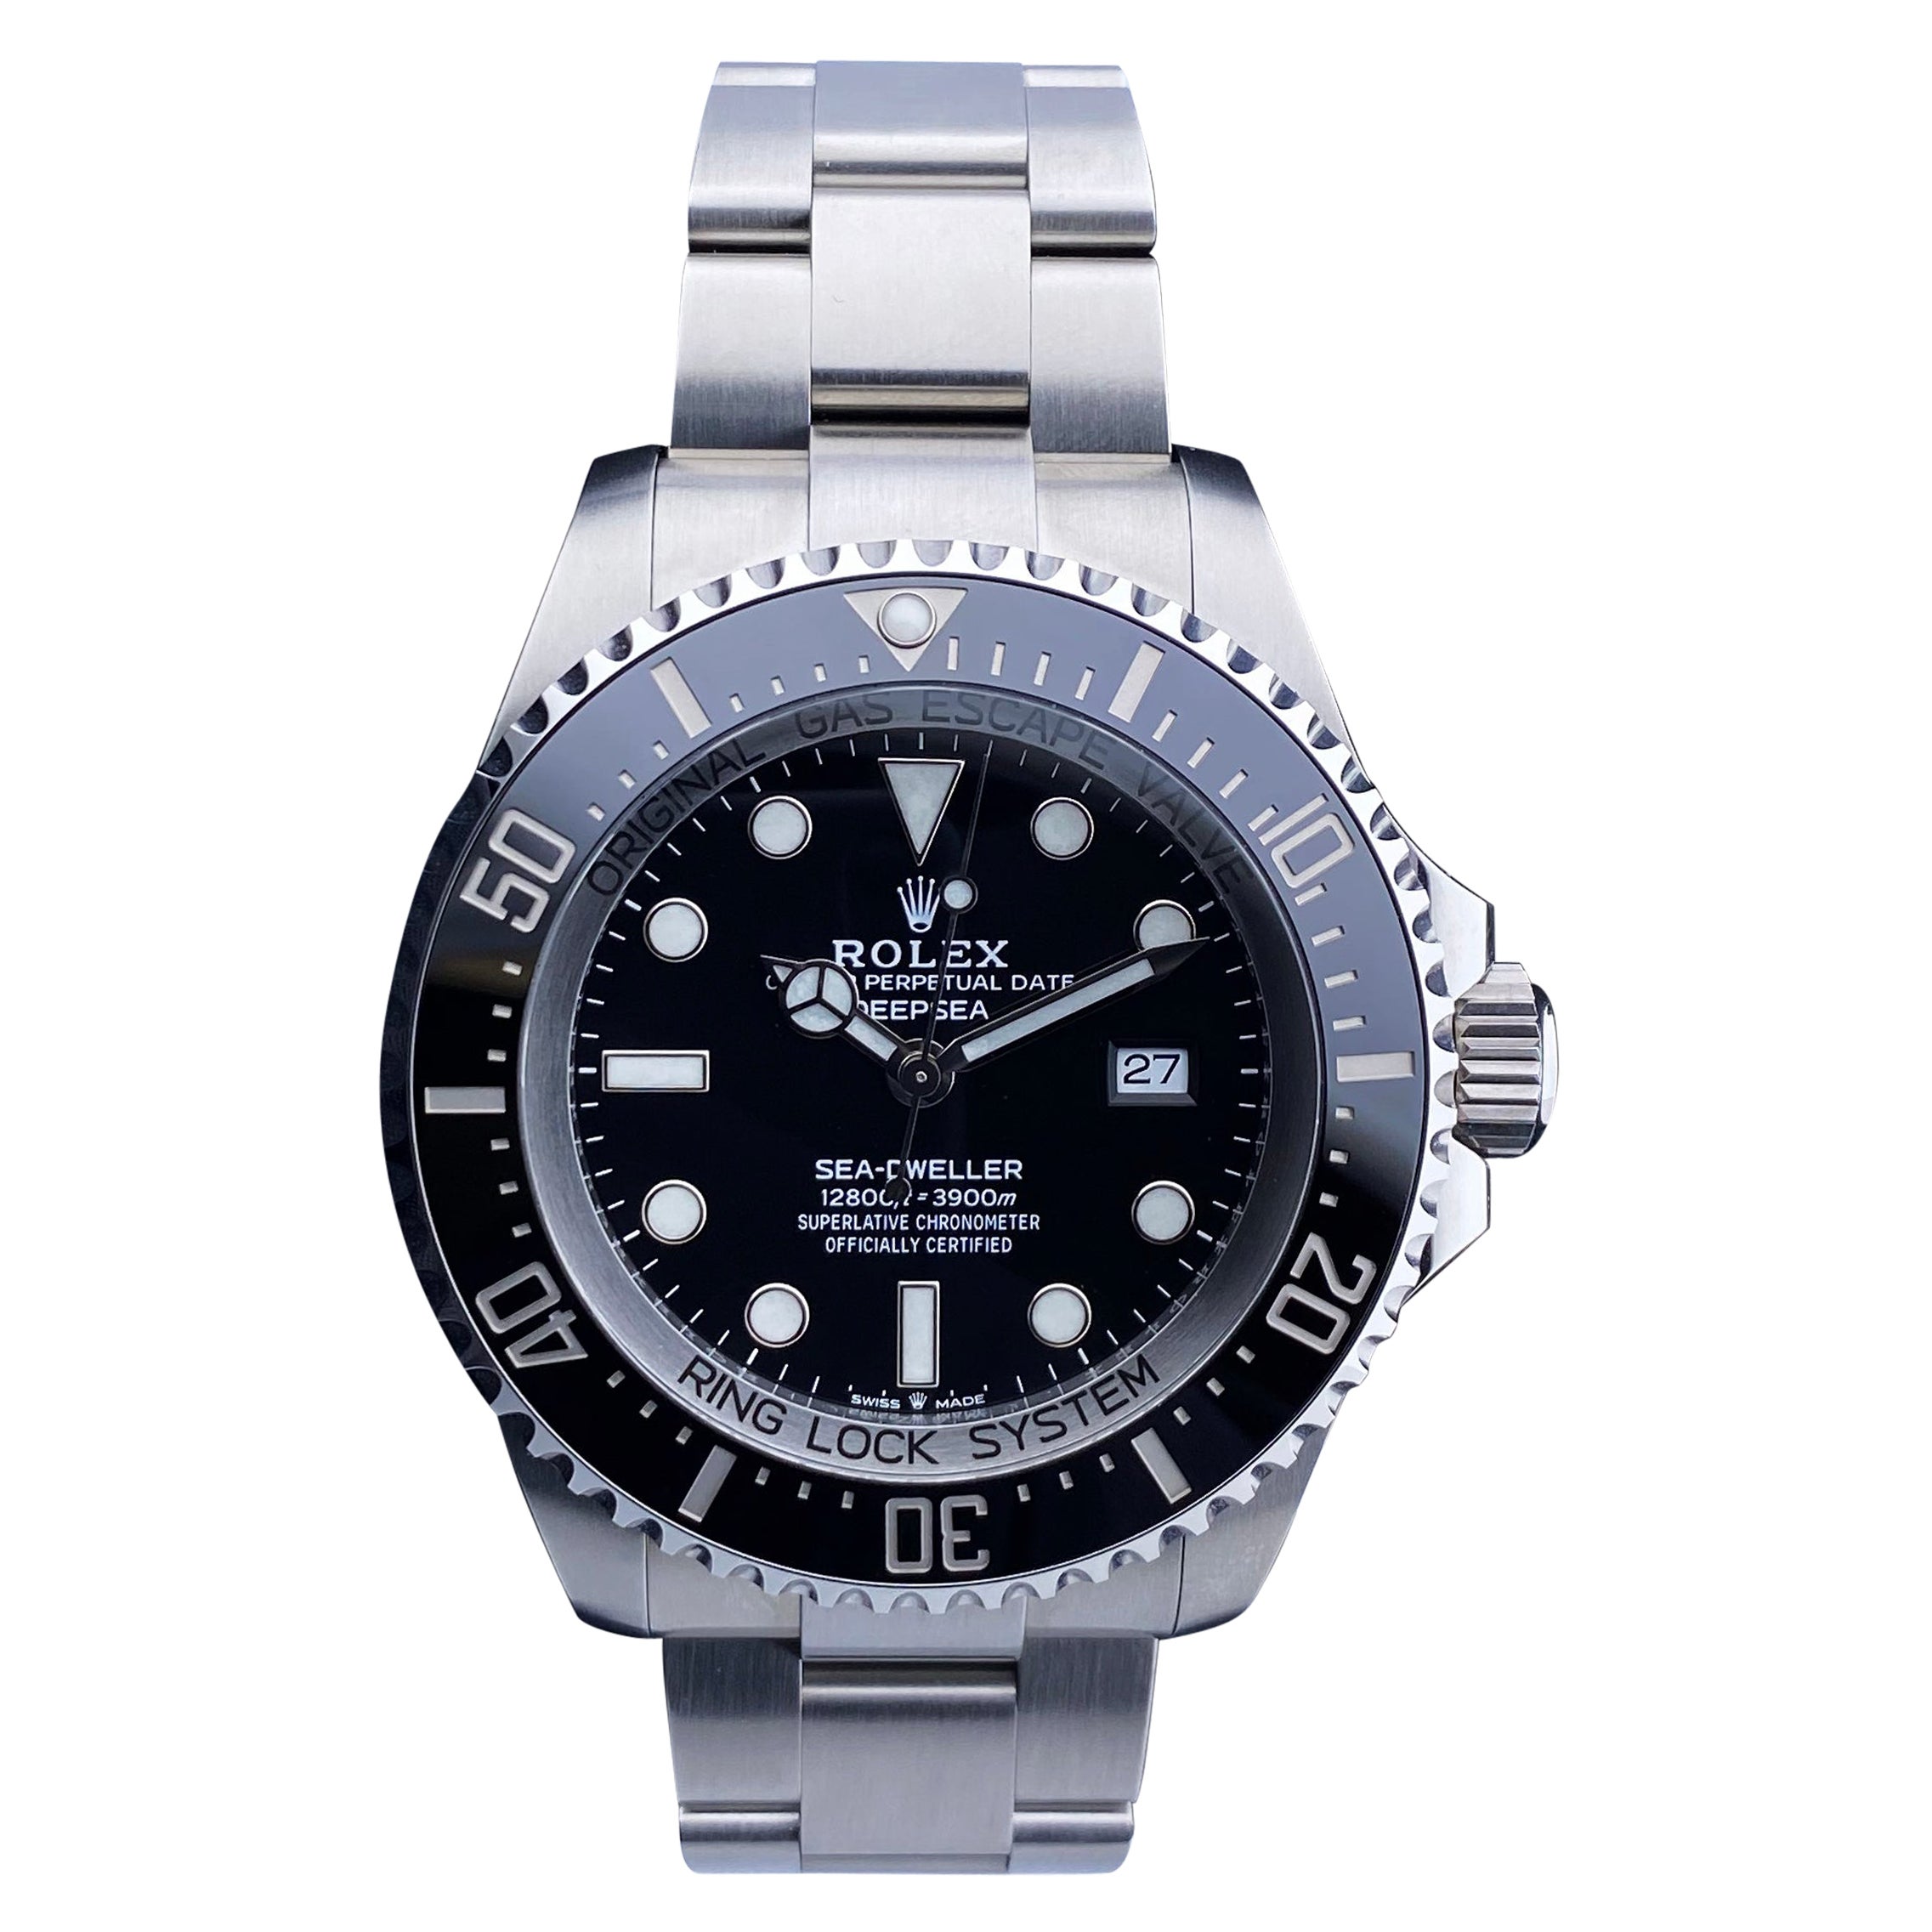 Rolex Oyster Deepsea 126660 Black Dial Mens Watch Box & Papers